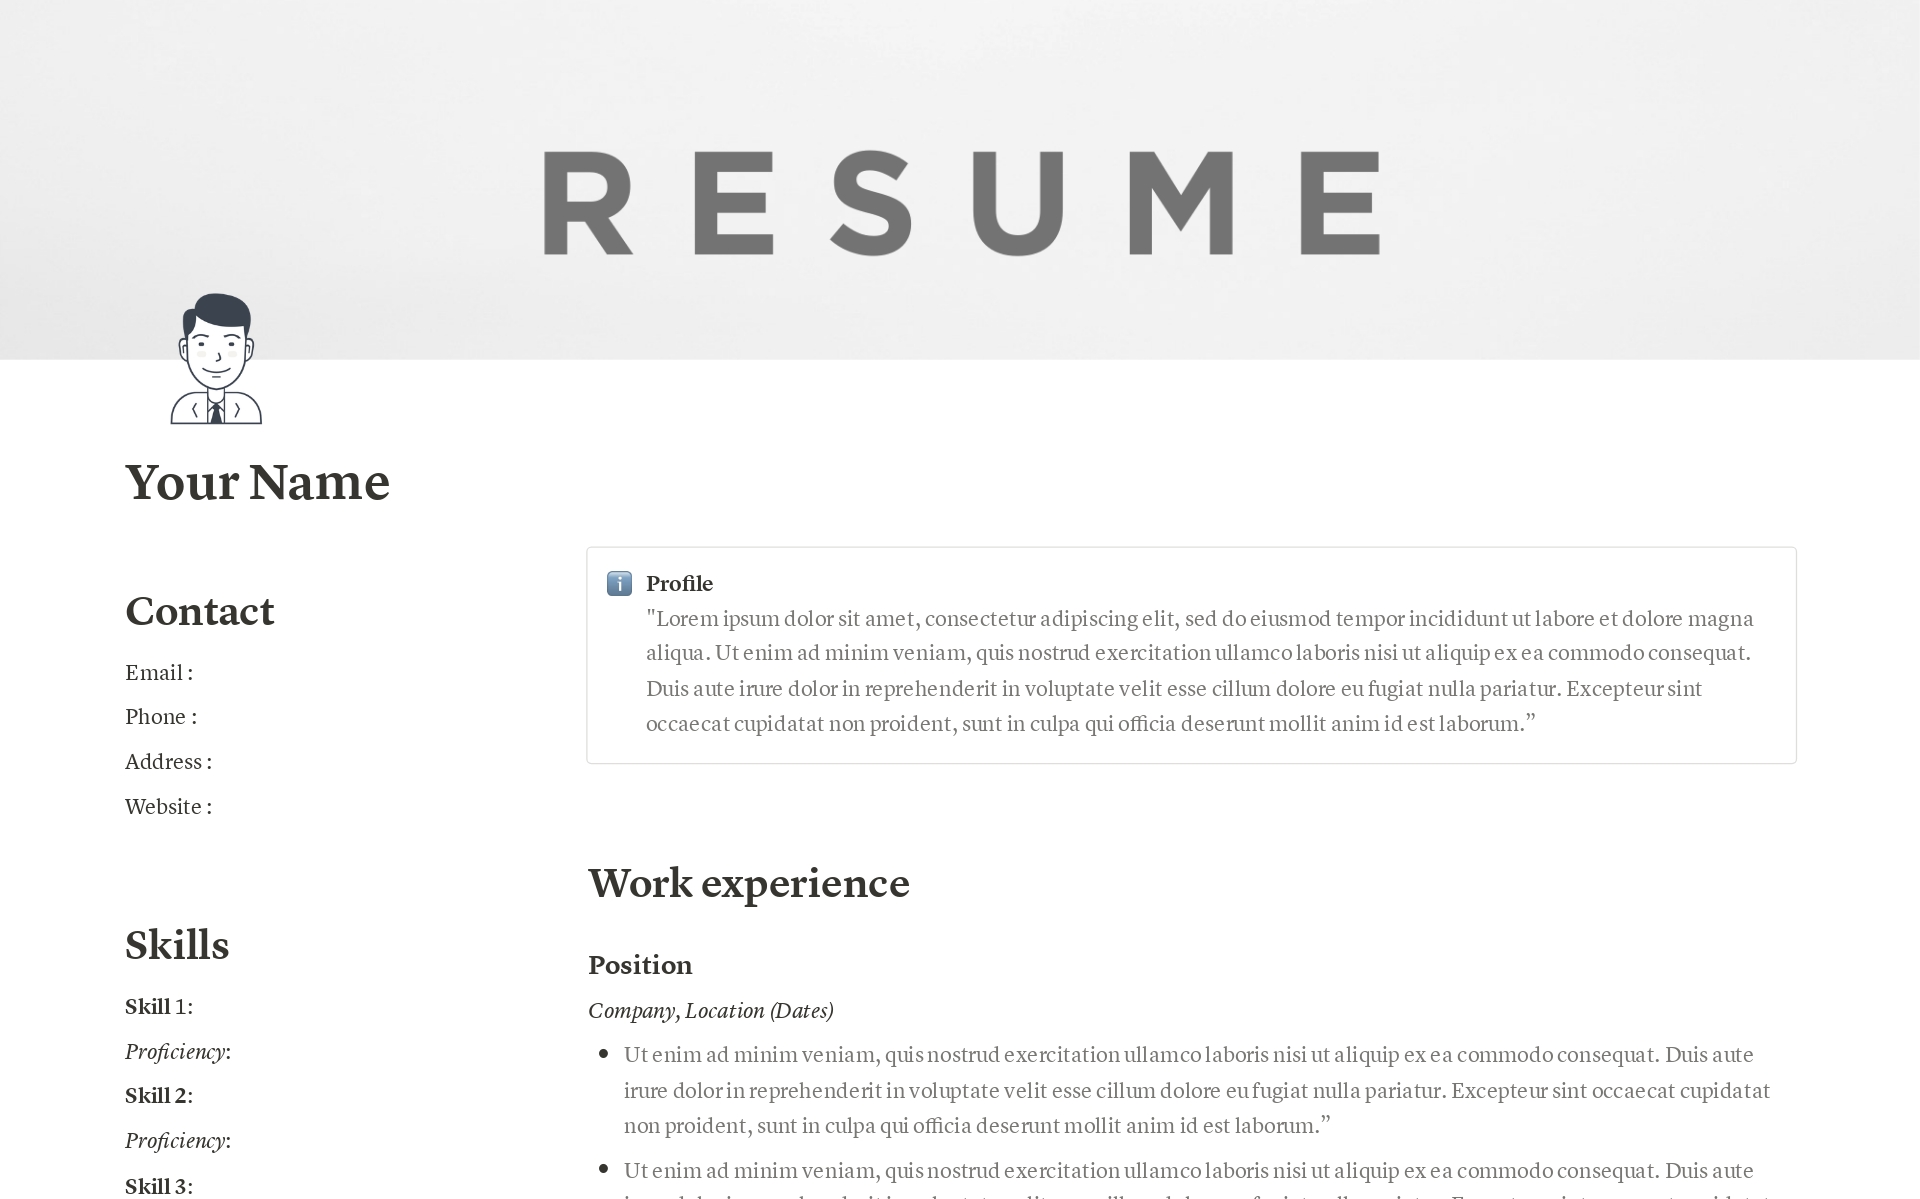 Our Professional Resume Template has been carefully created to assist you in creating a polished and effective resume with ease. Regardless of your level of experience, this template offers a simple and contemporary design that skillfully showcases your accomplishments, backgroun